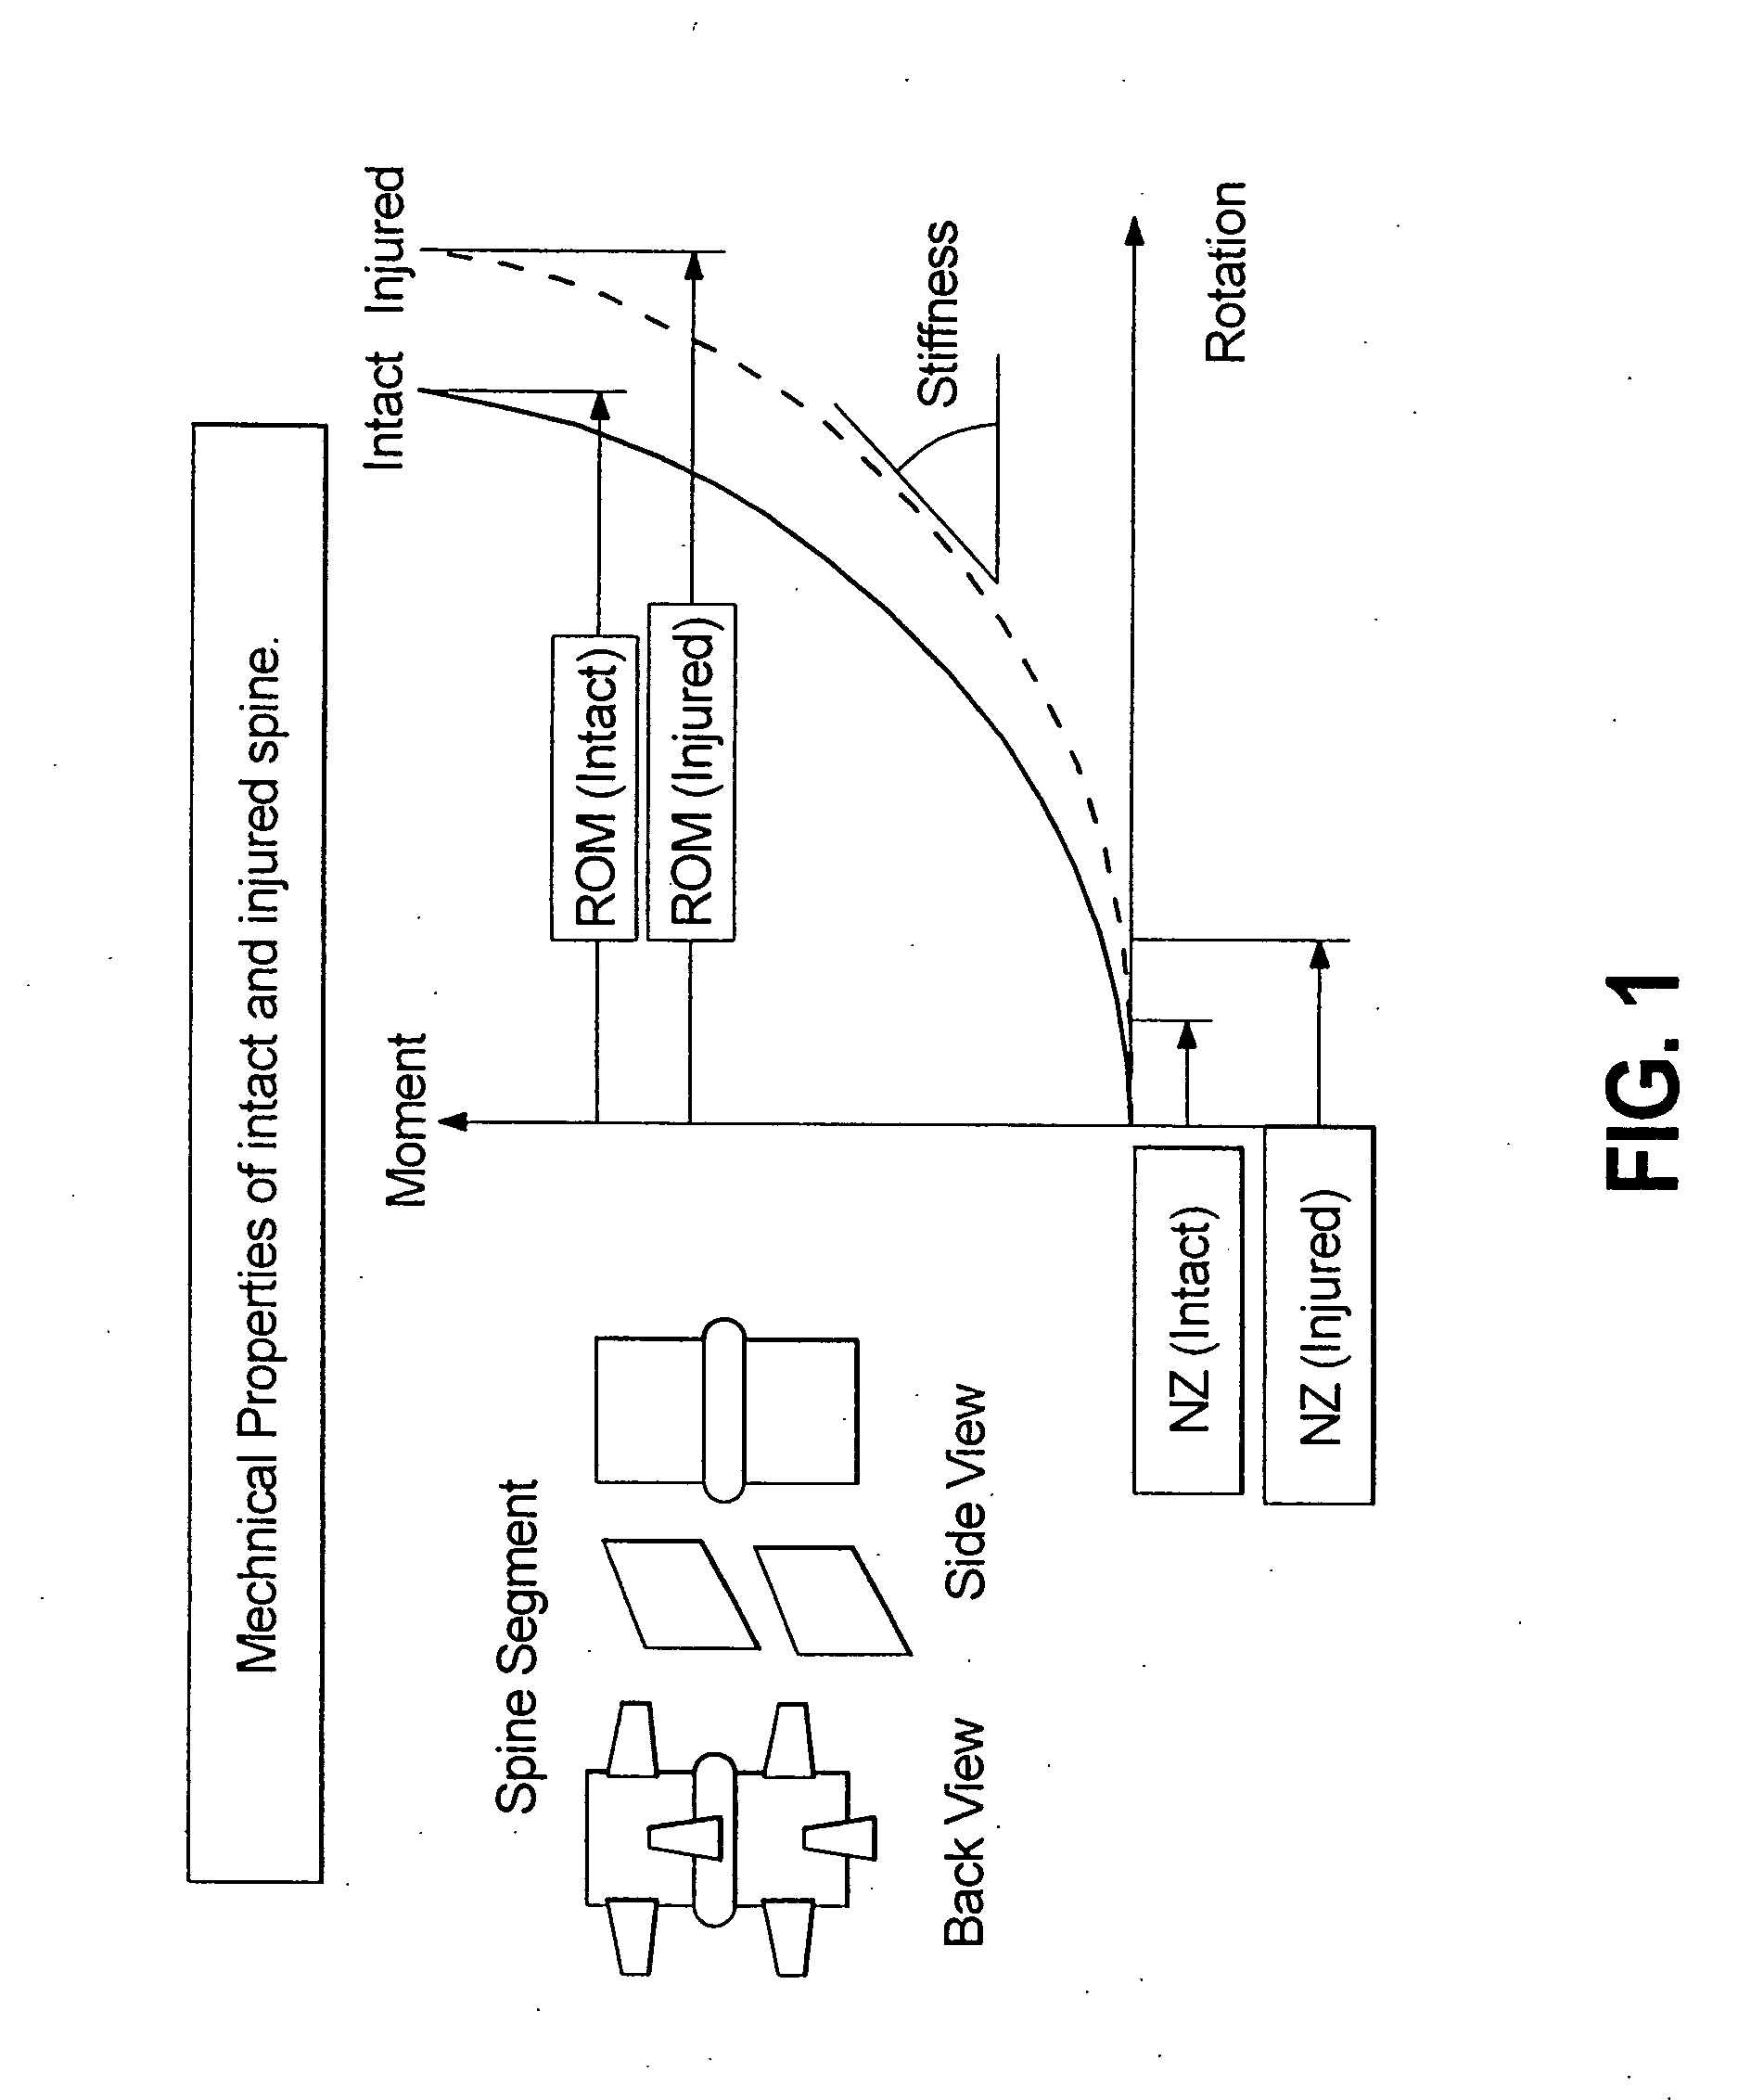 Spinal stabilization devices coupled by torsional member